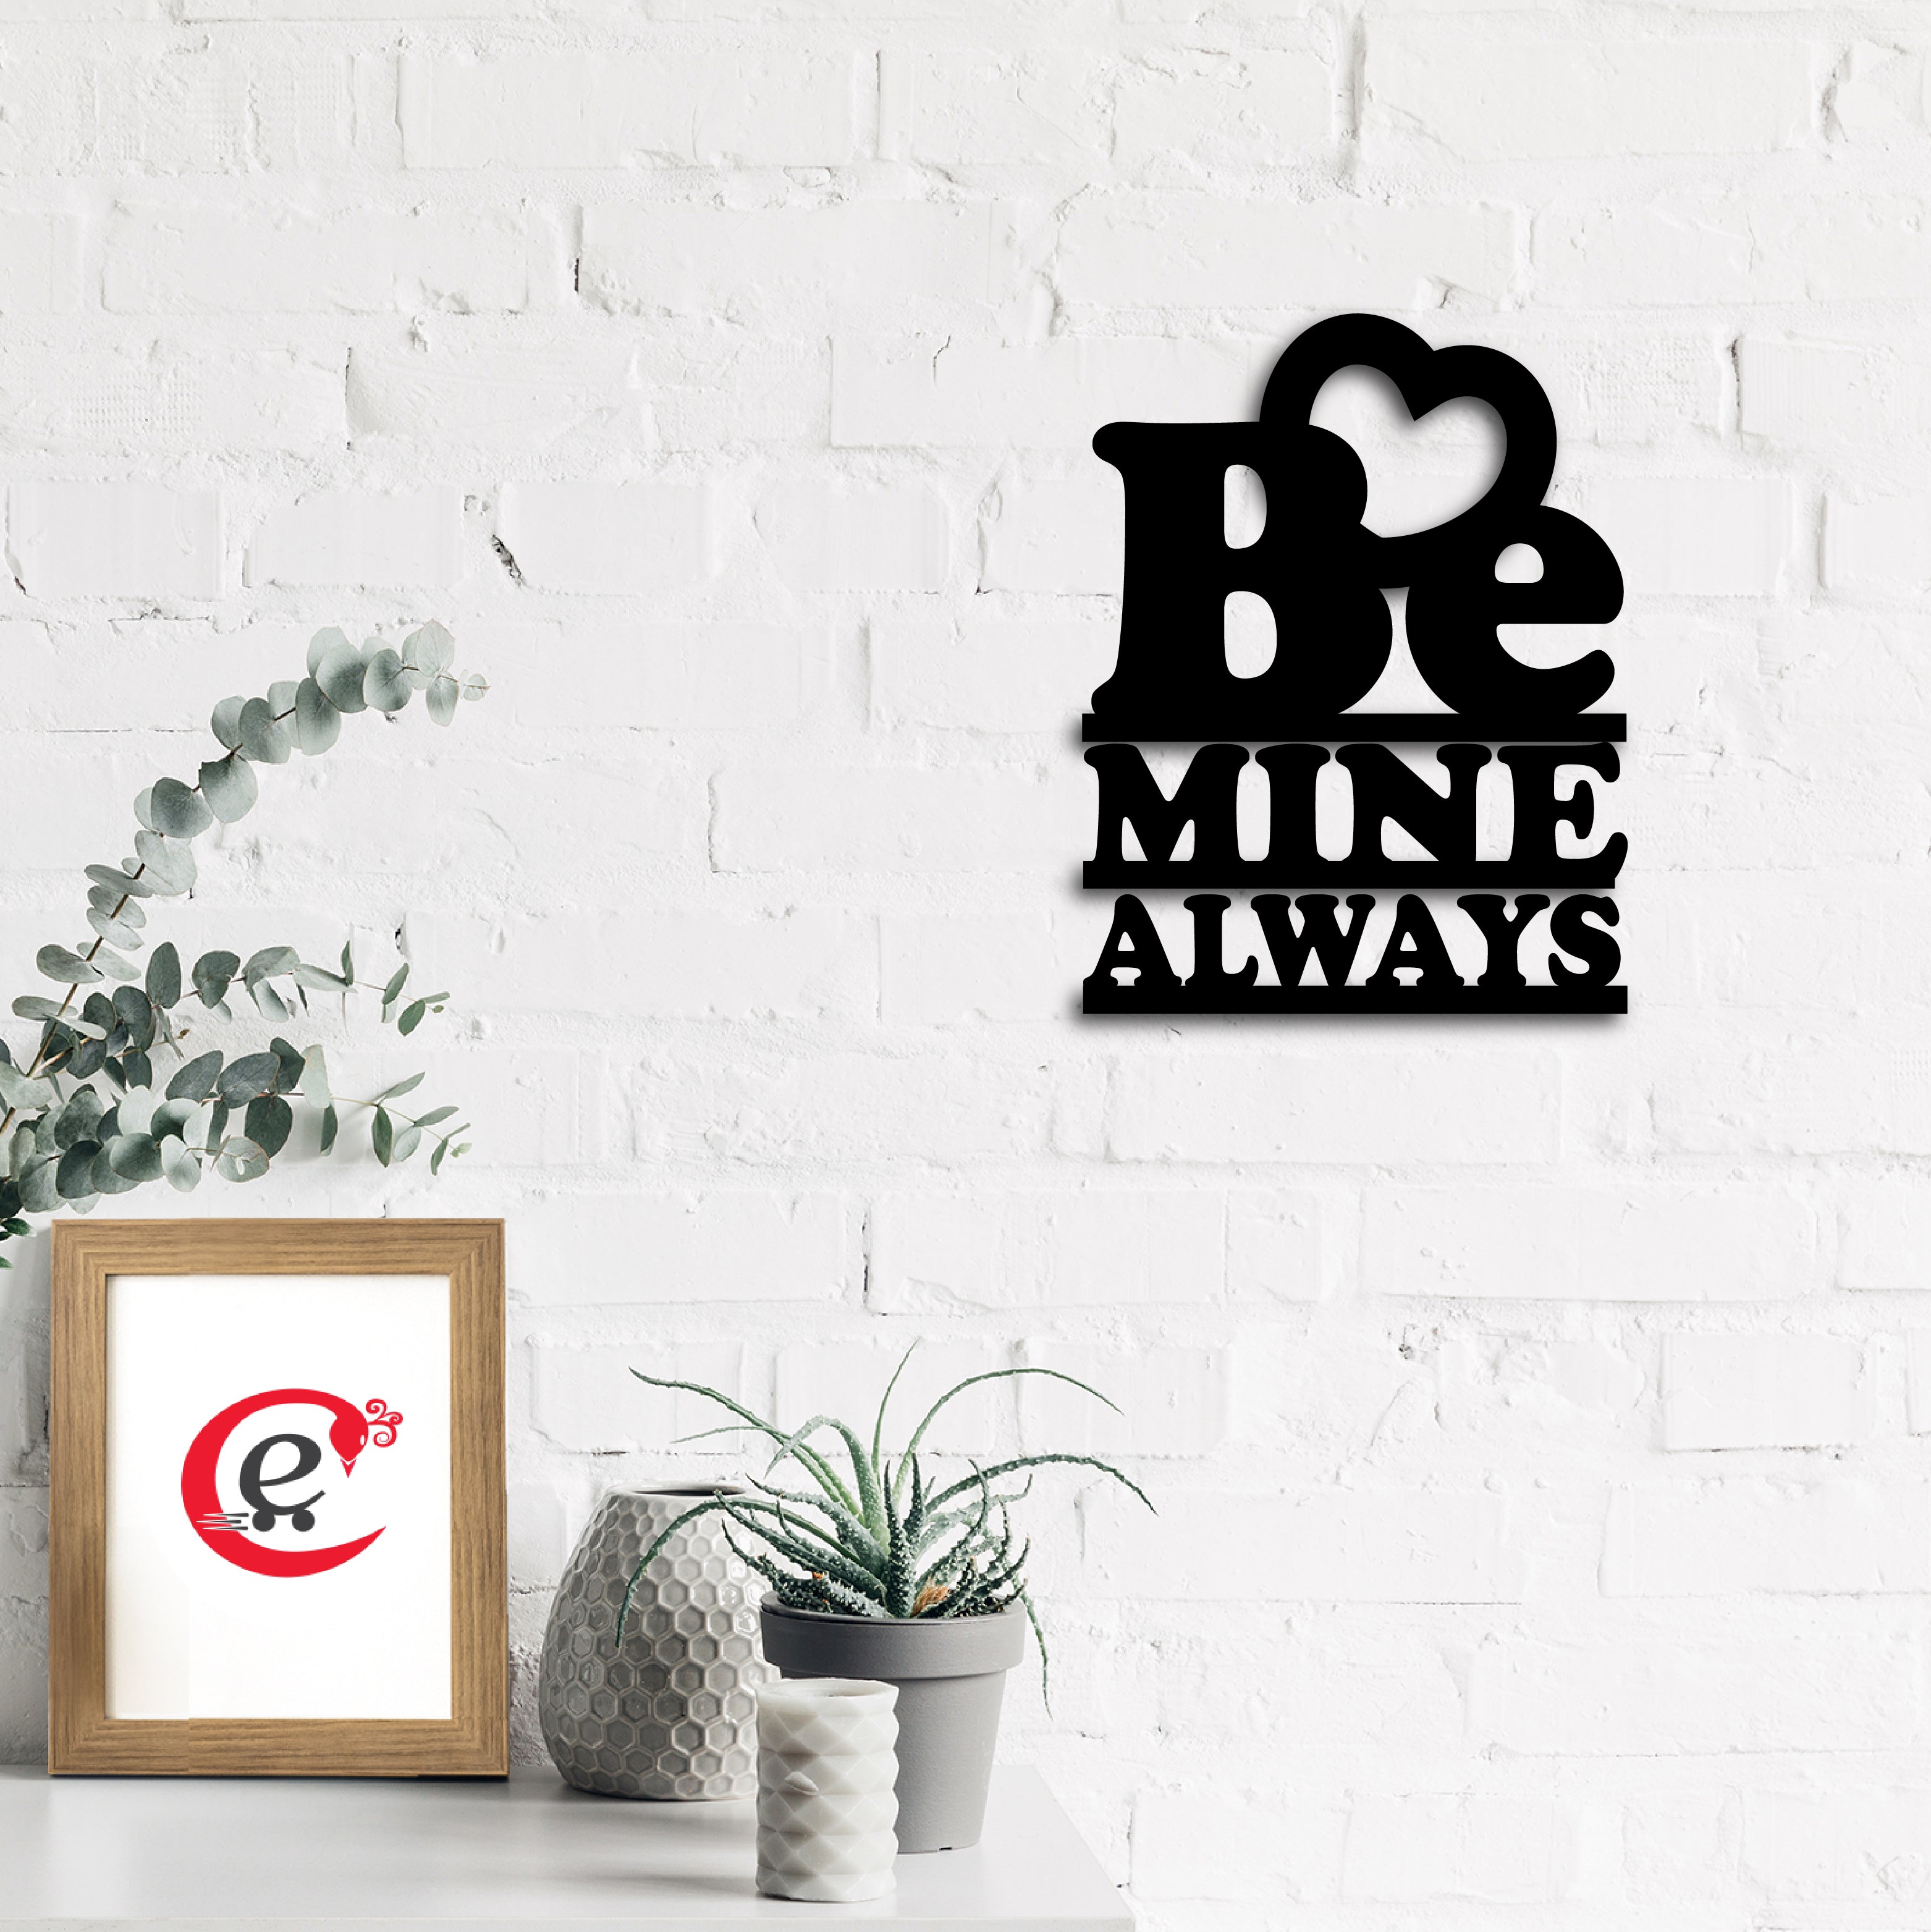 "Be Mine Always" Black Engineered Wood Wall Art Cutout, Ready to Hang Home Decor